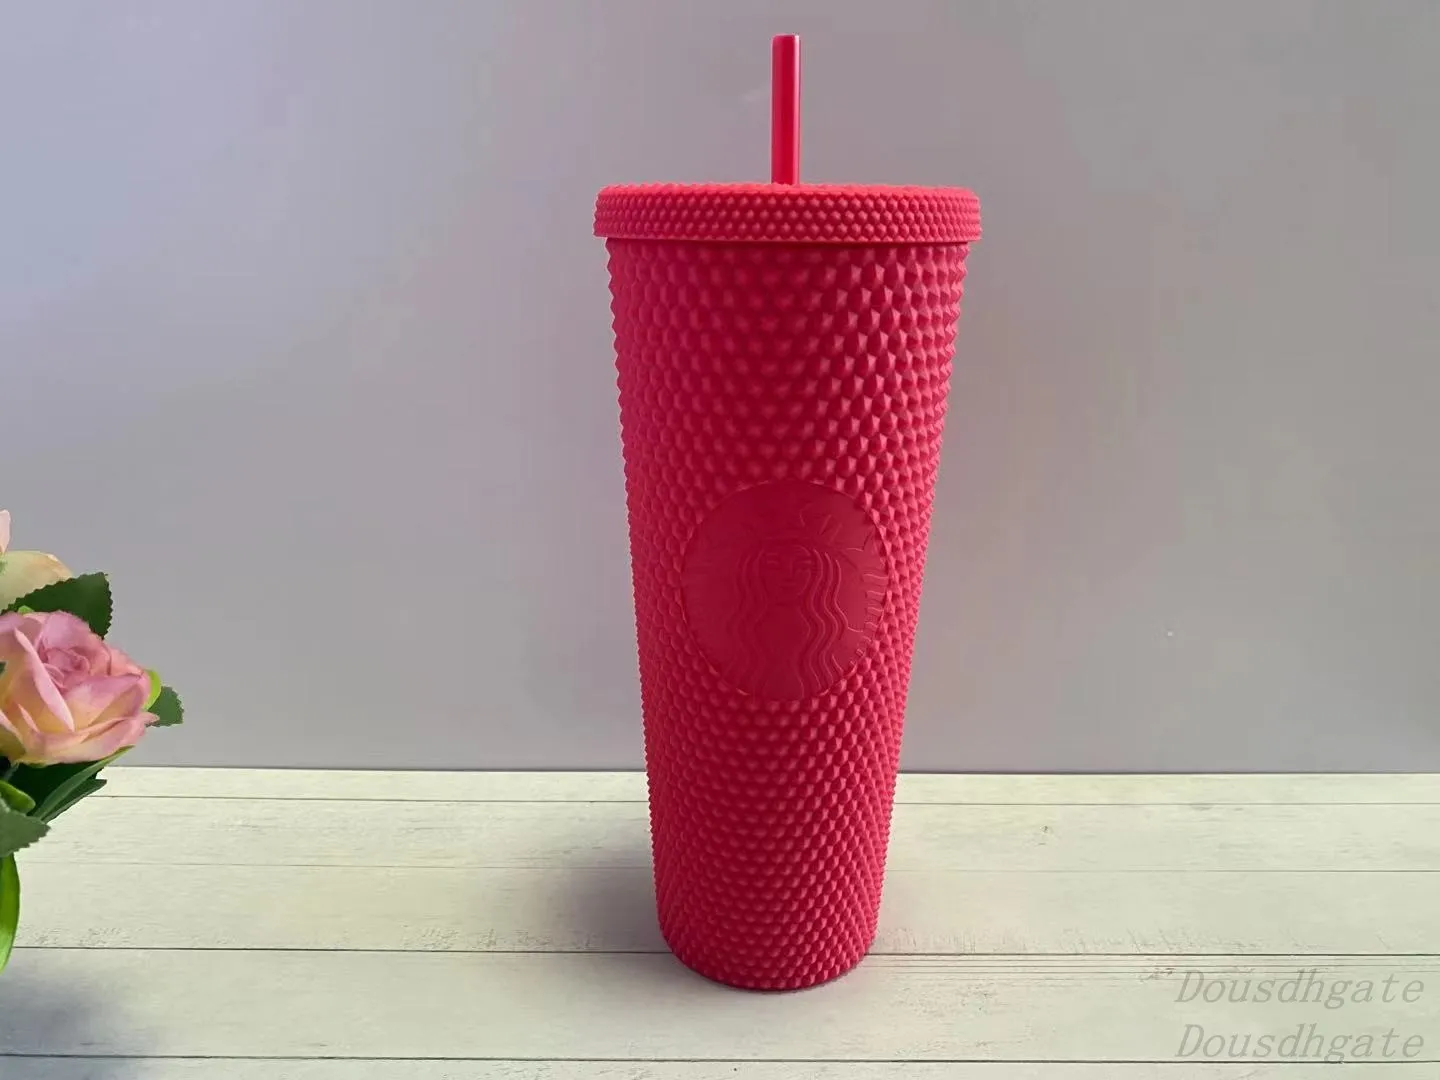 Starbucks Double Pink Durian Laser Straw Cups 710ML Tumblers Mermaid Plastic Cold Water Coffee Cup Gift Mugs236w